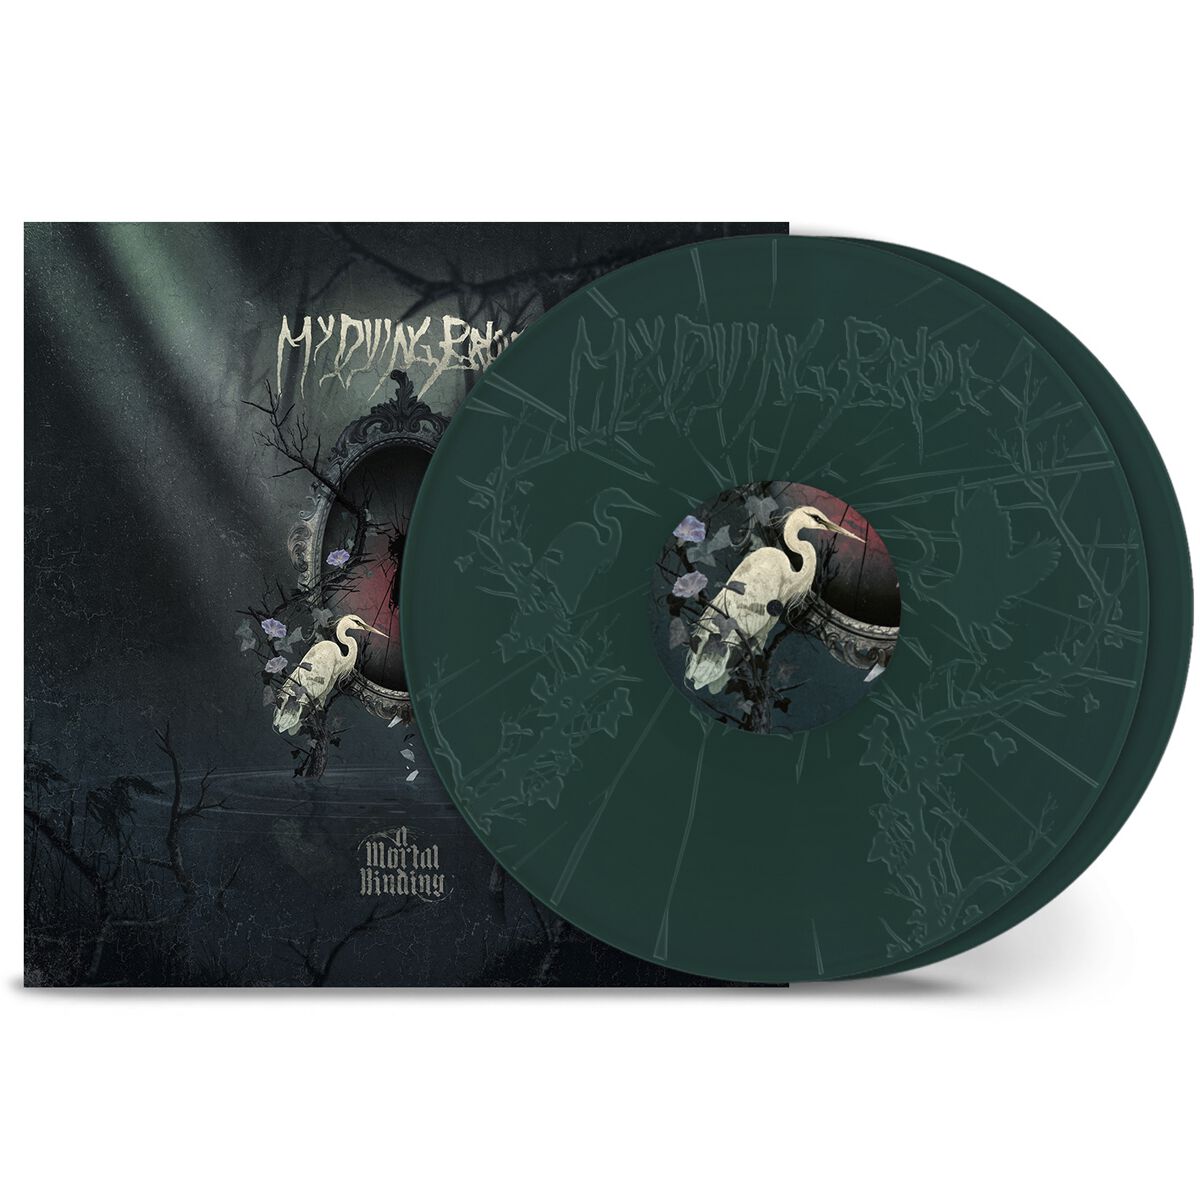 A mortal binding von My Dying Bride - 2-LP (Coloured, Limited Edition, Standard)